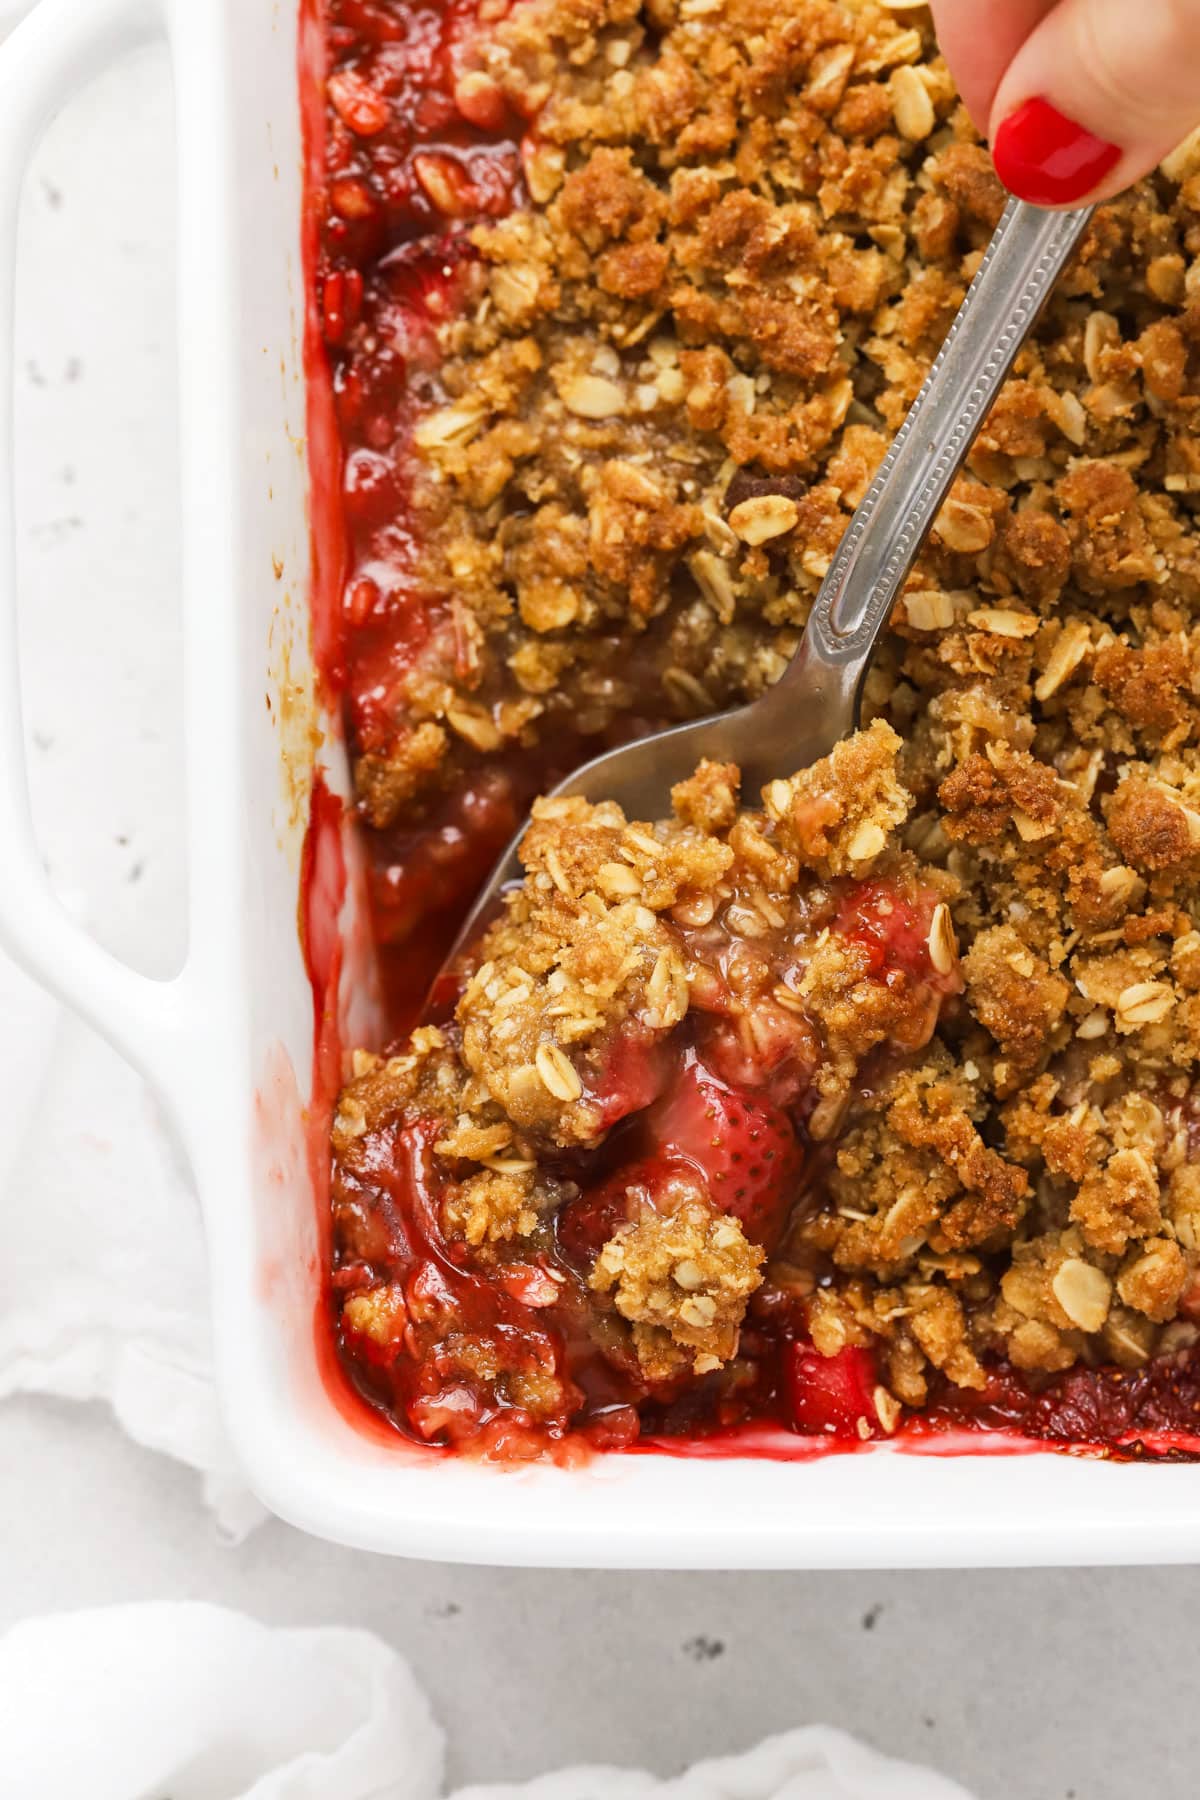 scooping a spoonful out of a pan of gluten free strawberry rhubarb crumble